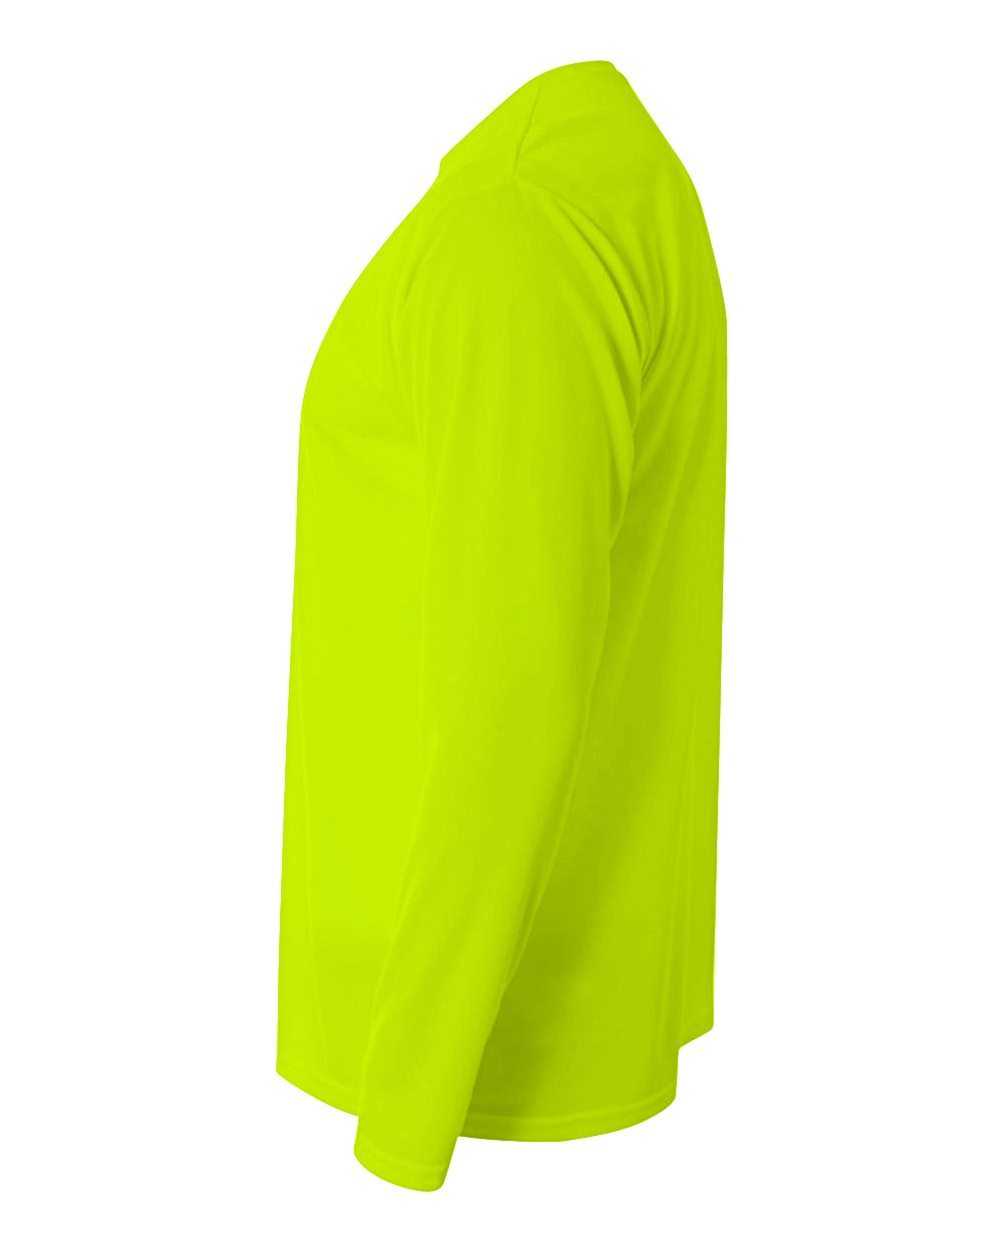 A4 NB3165 Youth Cooling Performance Long Sleeve Crew - Lime - HIT a Double